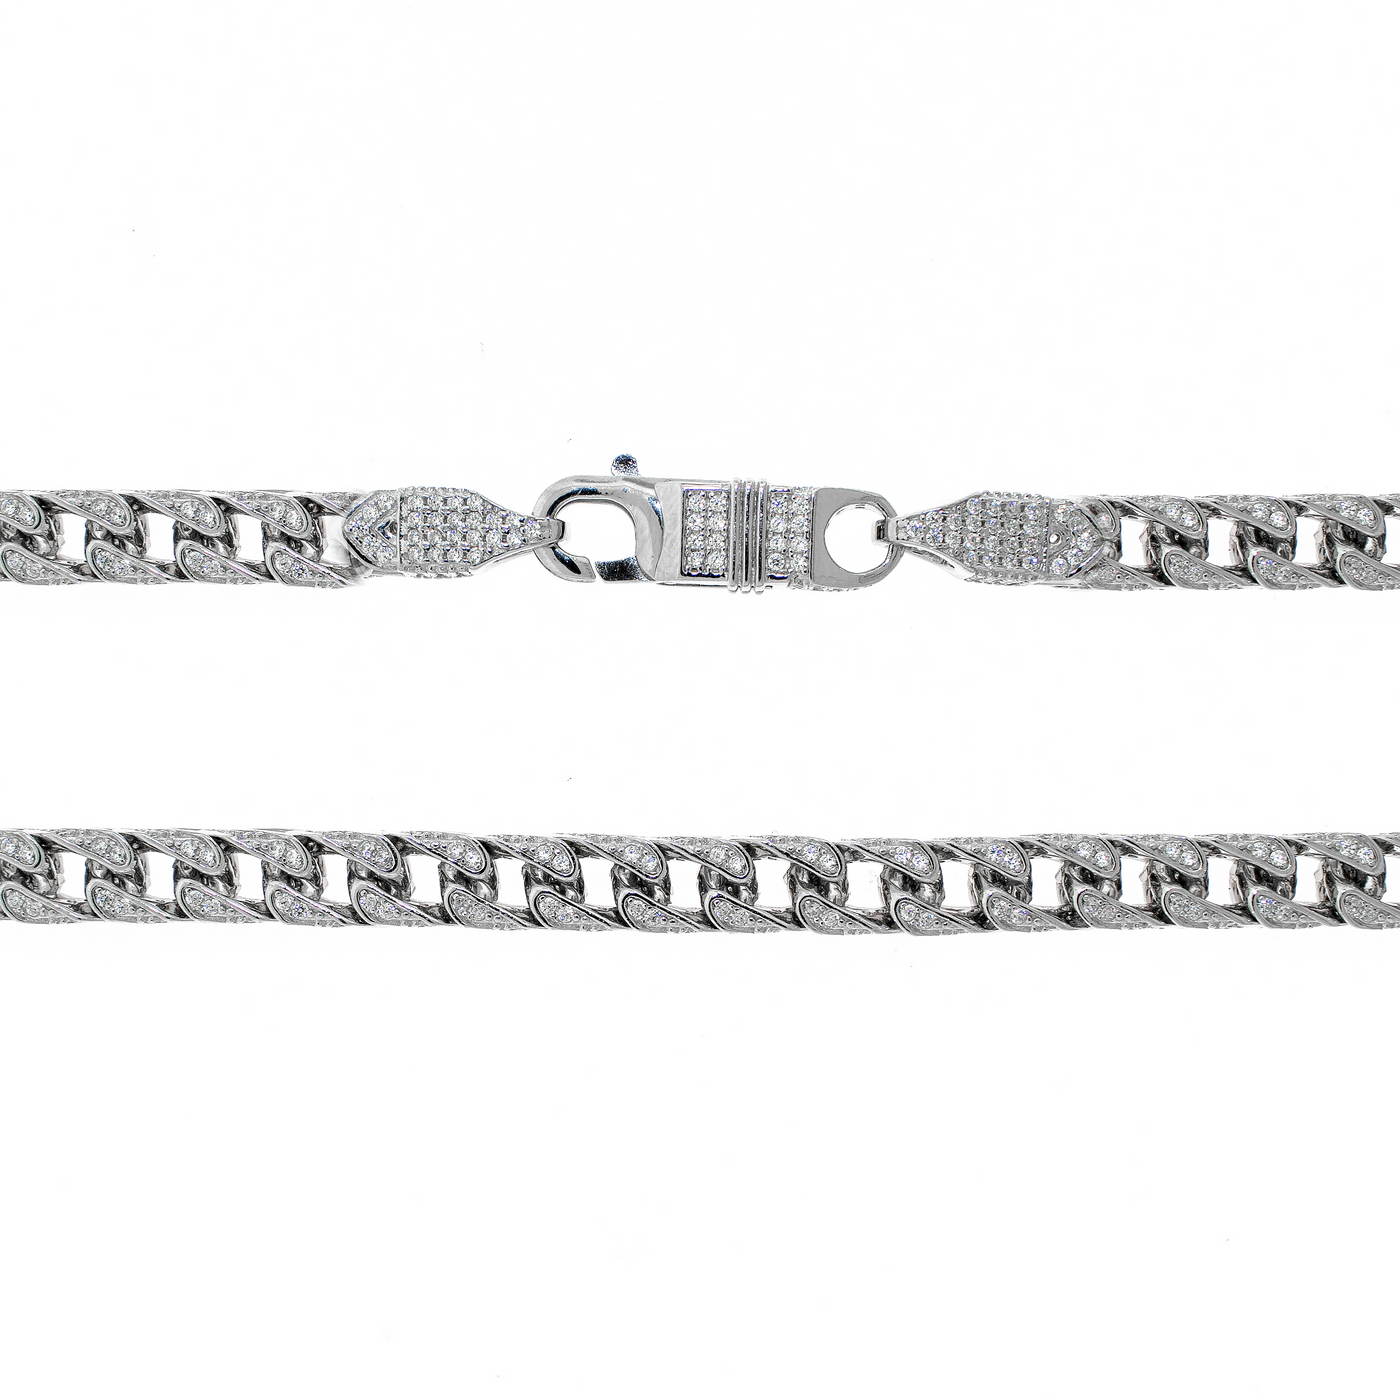 Rhodium Plated CZ Pave Franco - Necklace